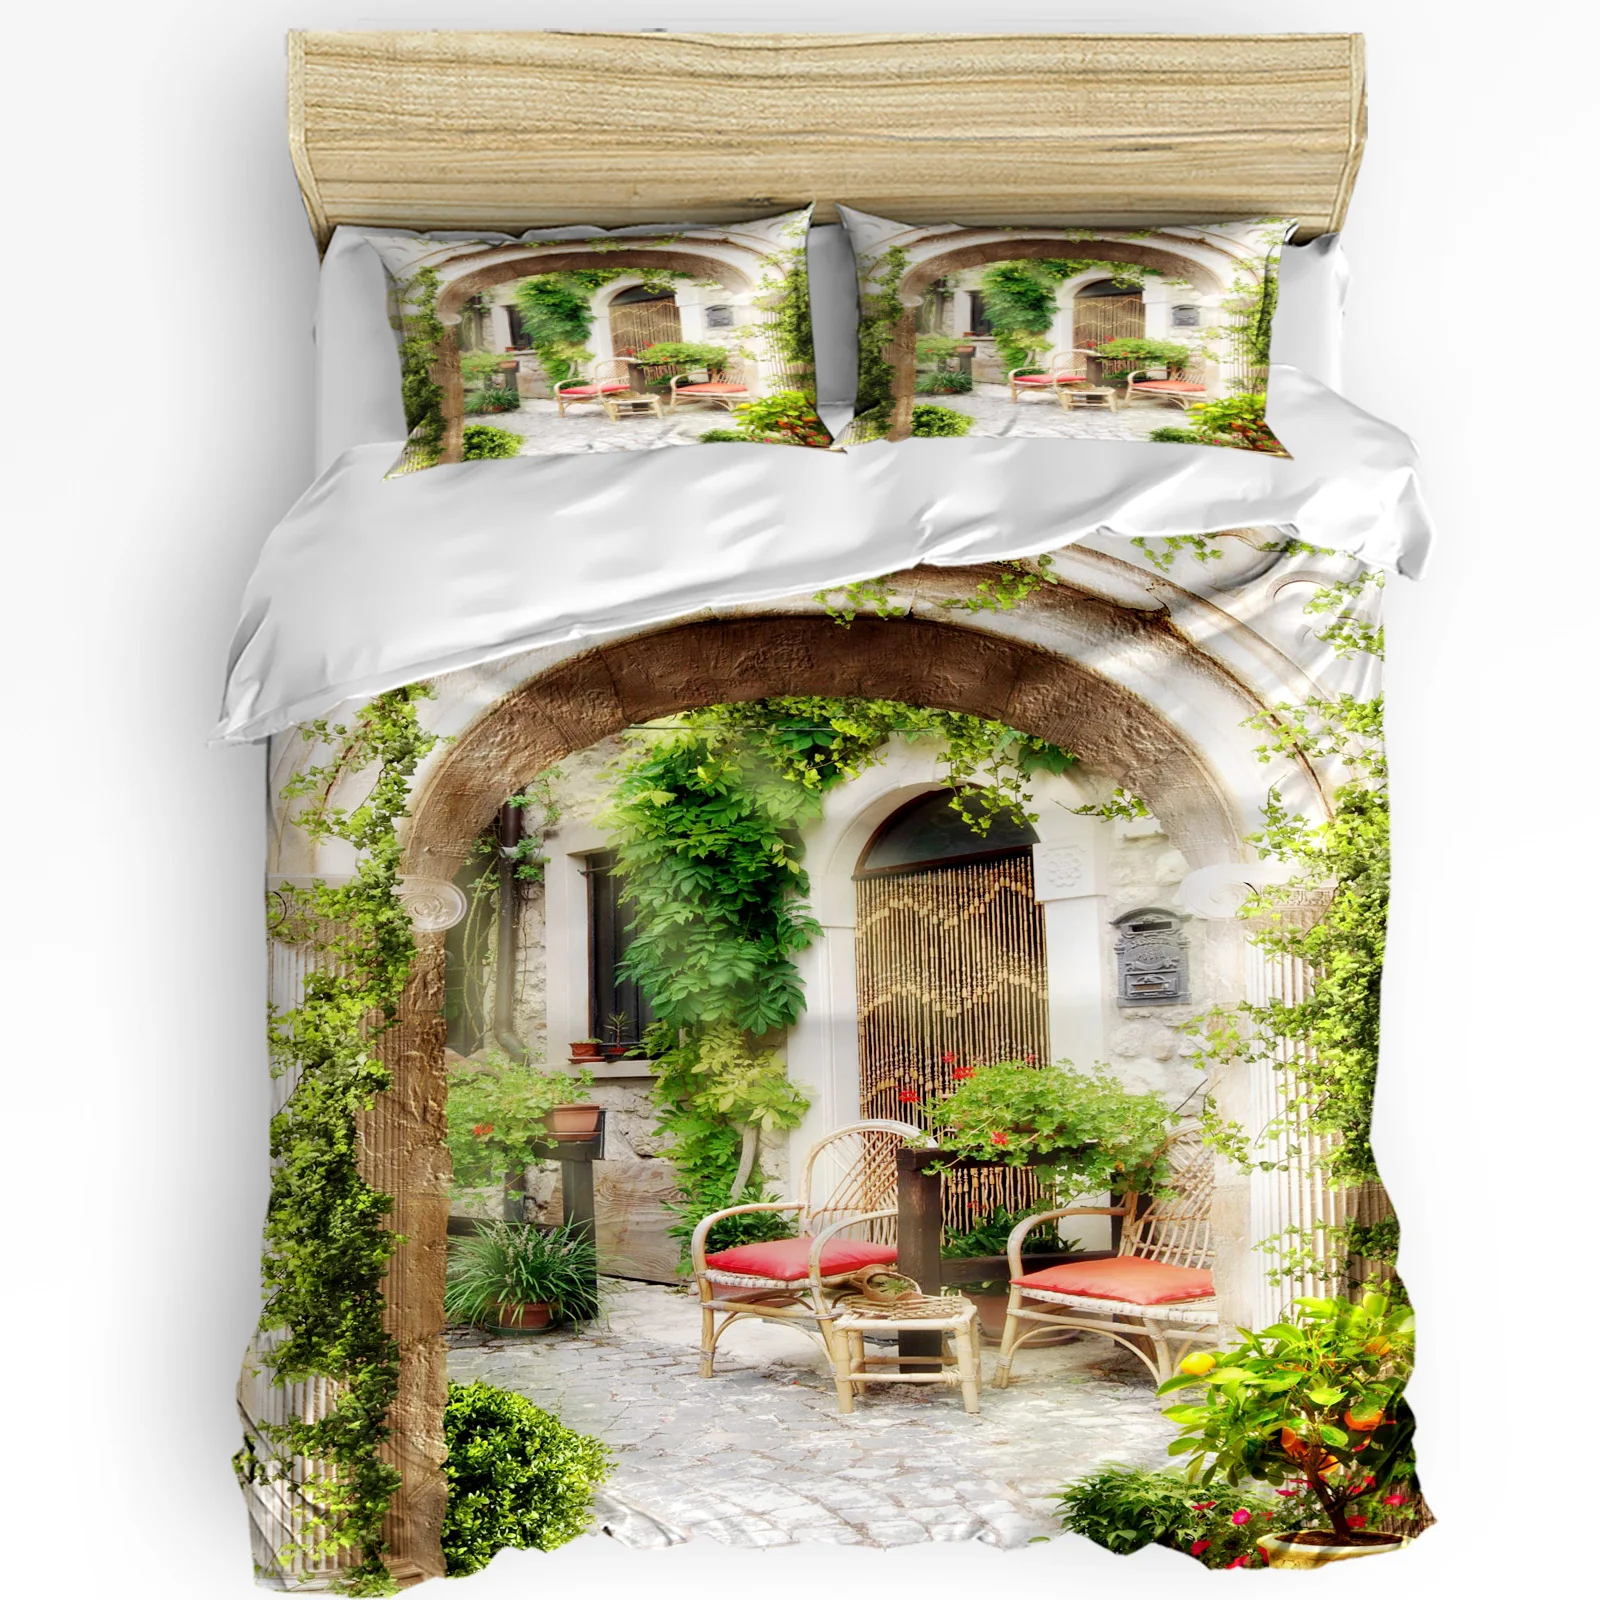 

Garden Italian Arch Architectural Flowers Street 3pcs Bedding Set For Double Bed Home Textile Duvet Cover Quilt Cover Pillowcase